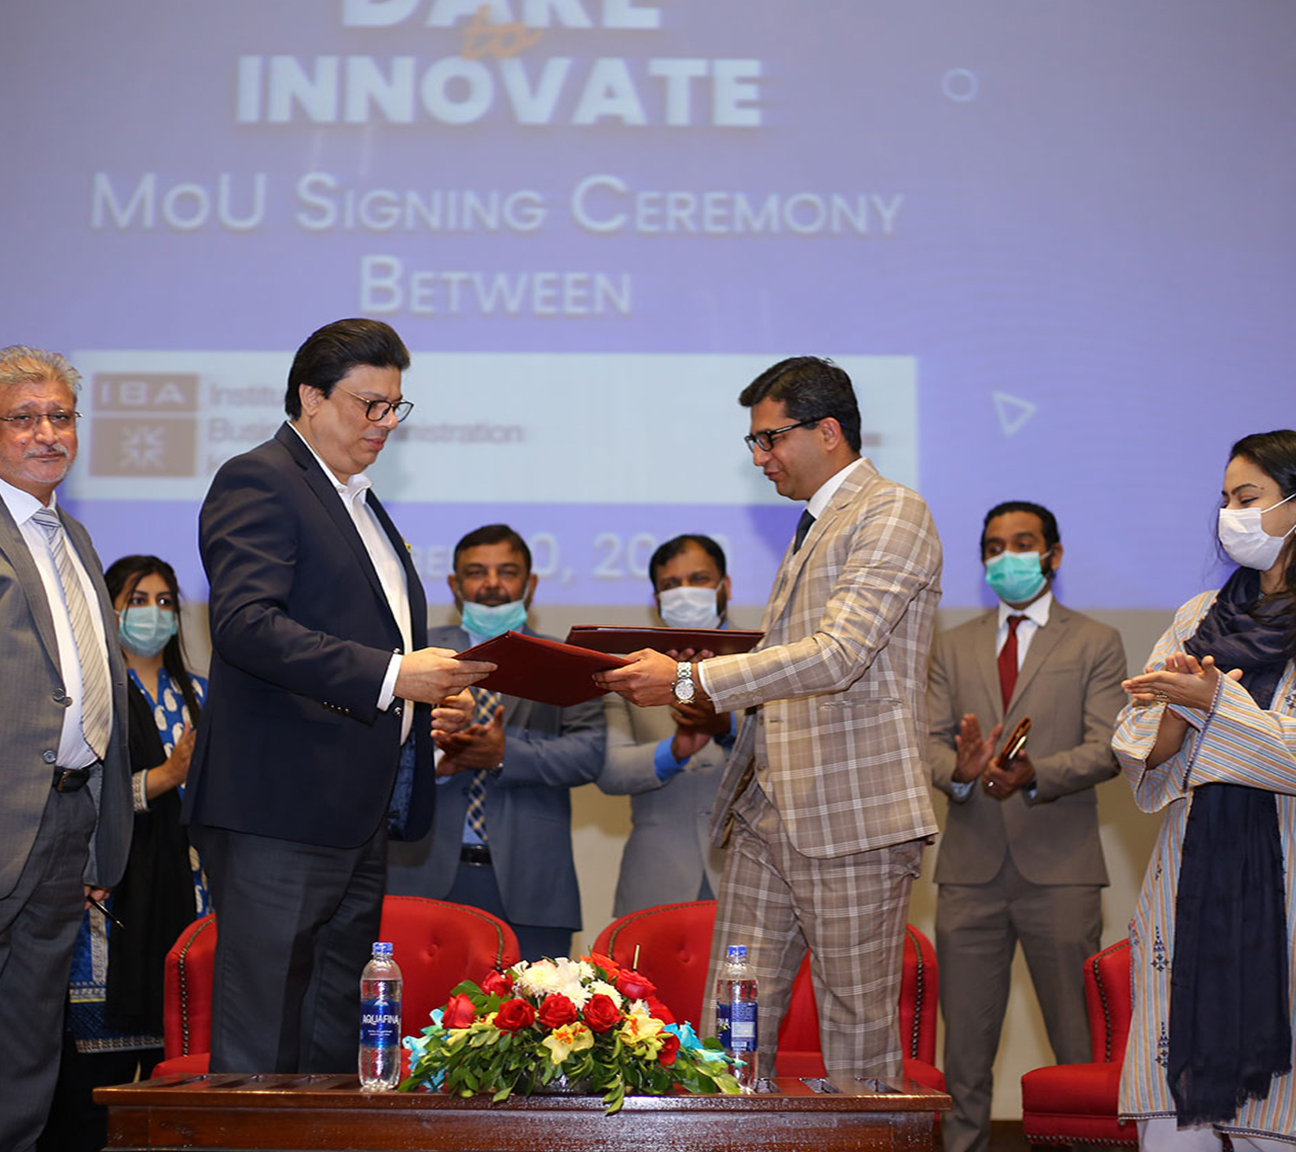 IBA AND IBL INK AN MOU TO PROMOTE  INDUSTRY-ACADEMIA LINKAGES